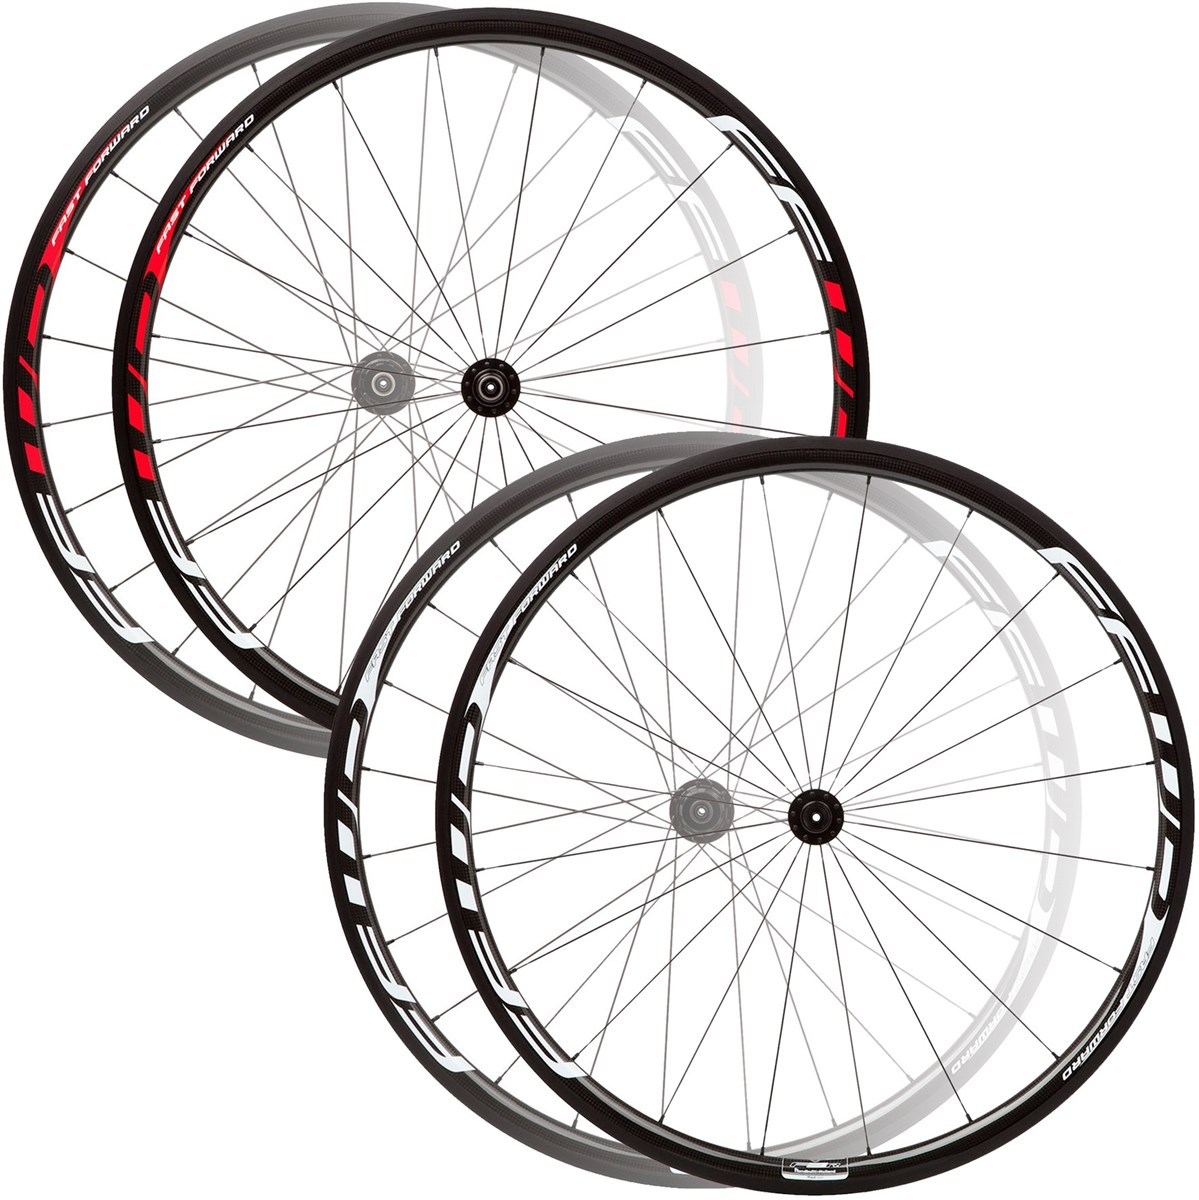 Fast Forward F3R Full Carbon Clincher 700c Road Wheelset (DT180c) product image